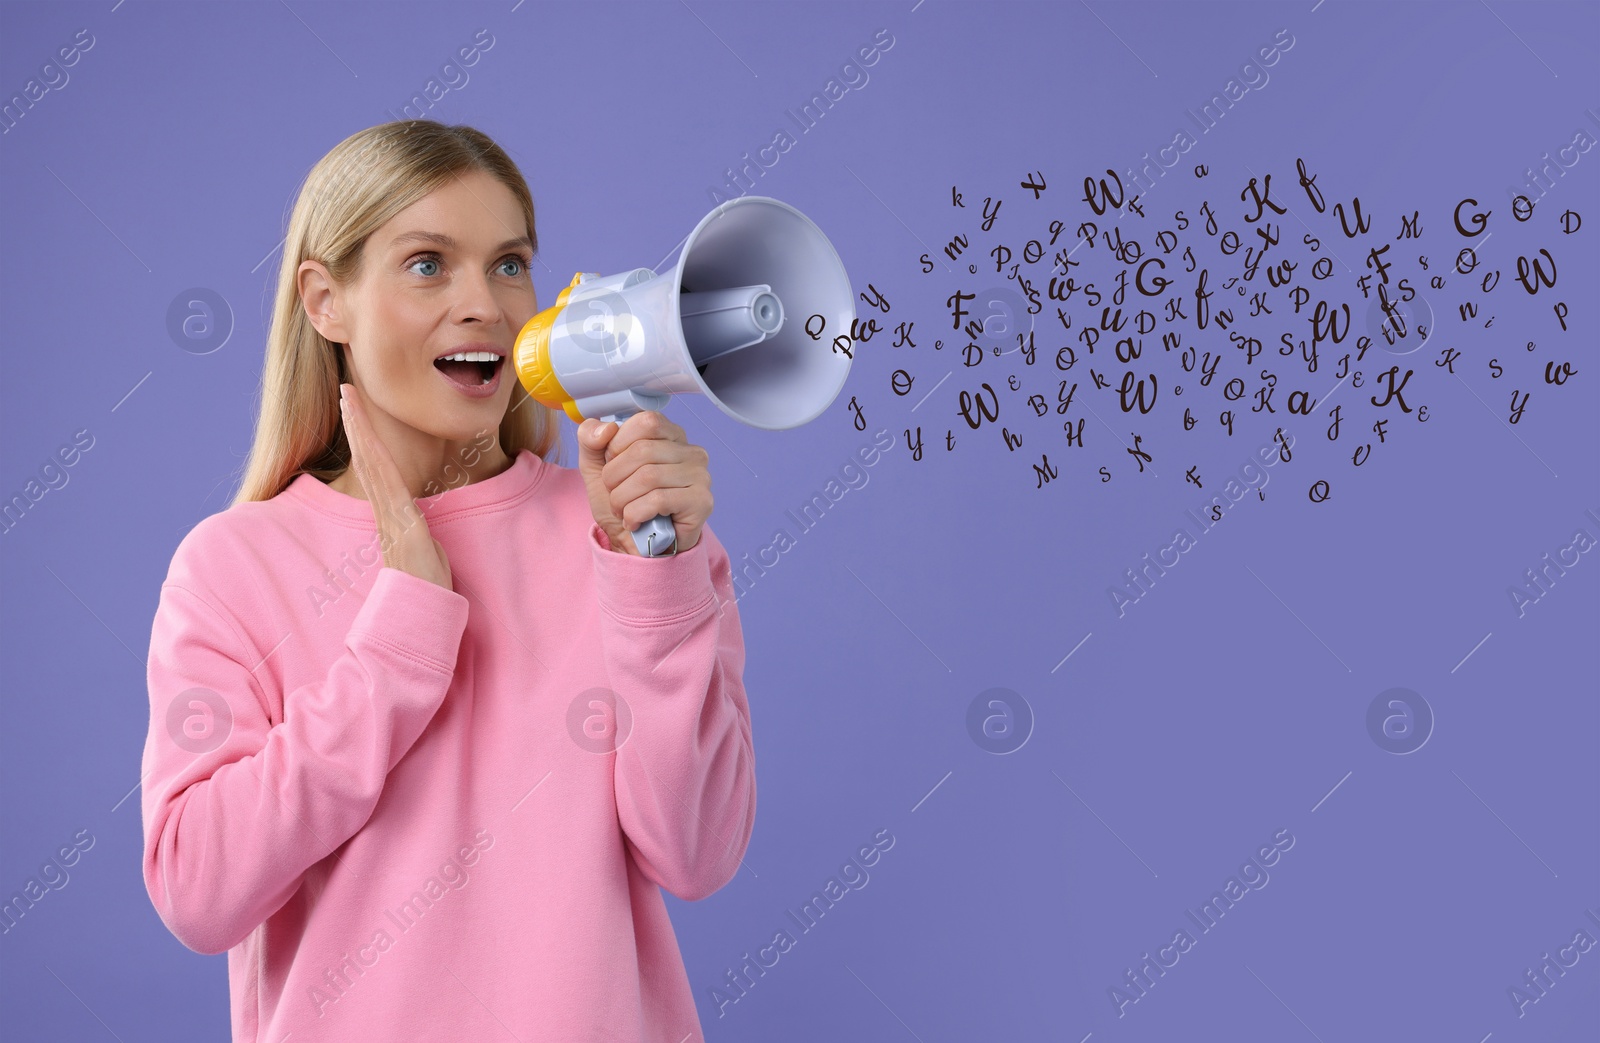 Image of Woman using megaphone on violet background. Letters flying out of device